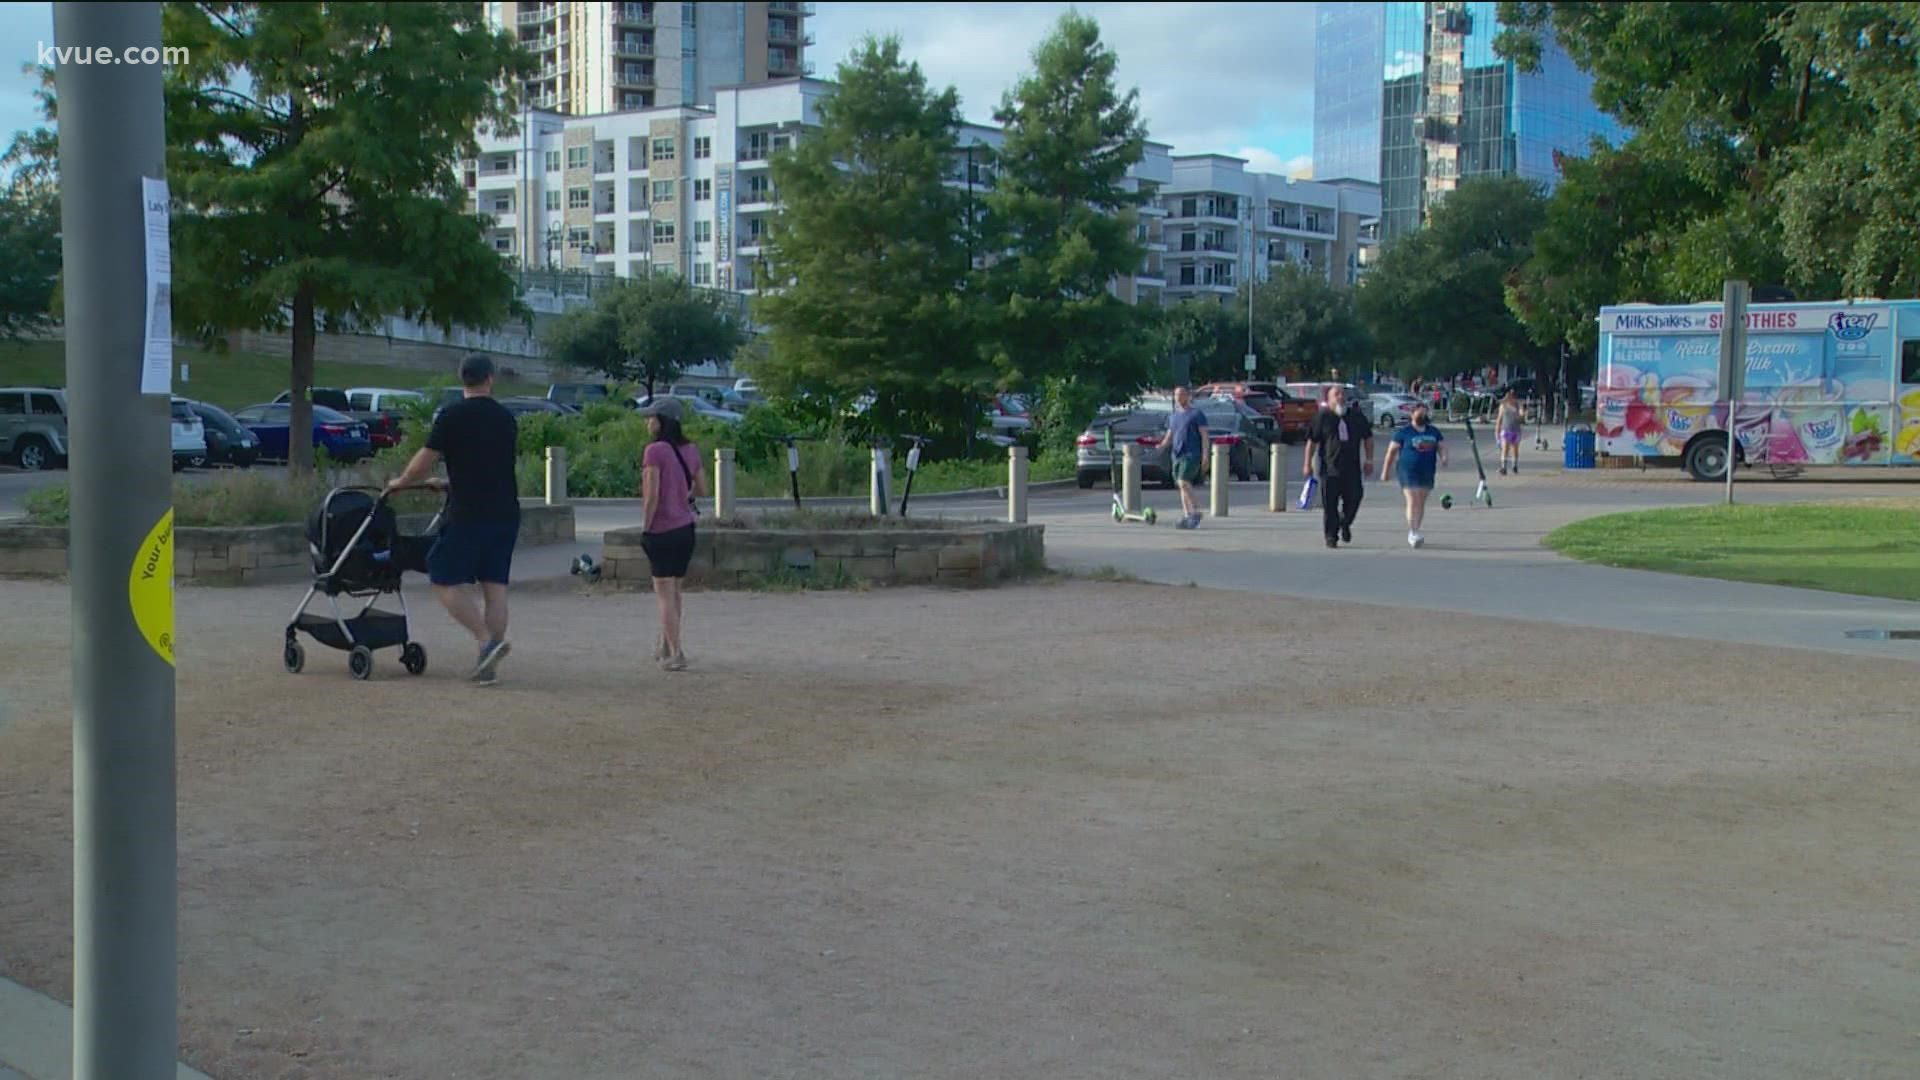 Parking lots at some of Austin’s popular downtown parks are filling up with people who aren’t always using the parks.